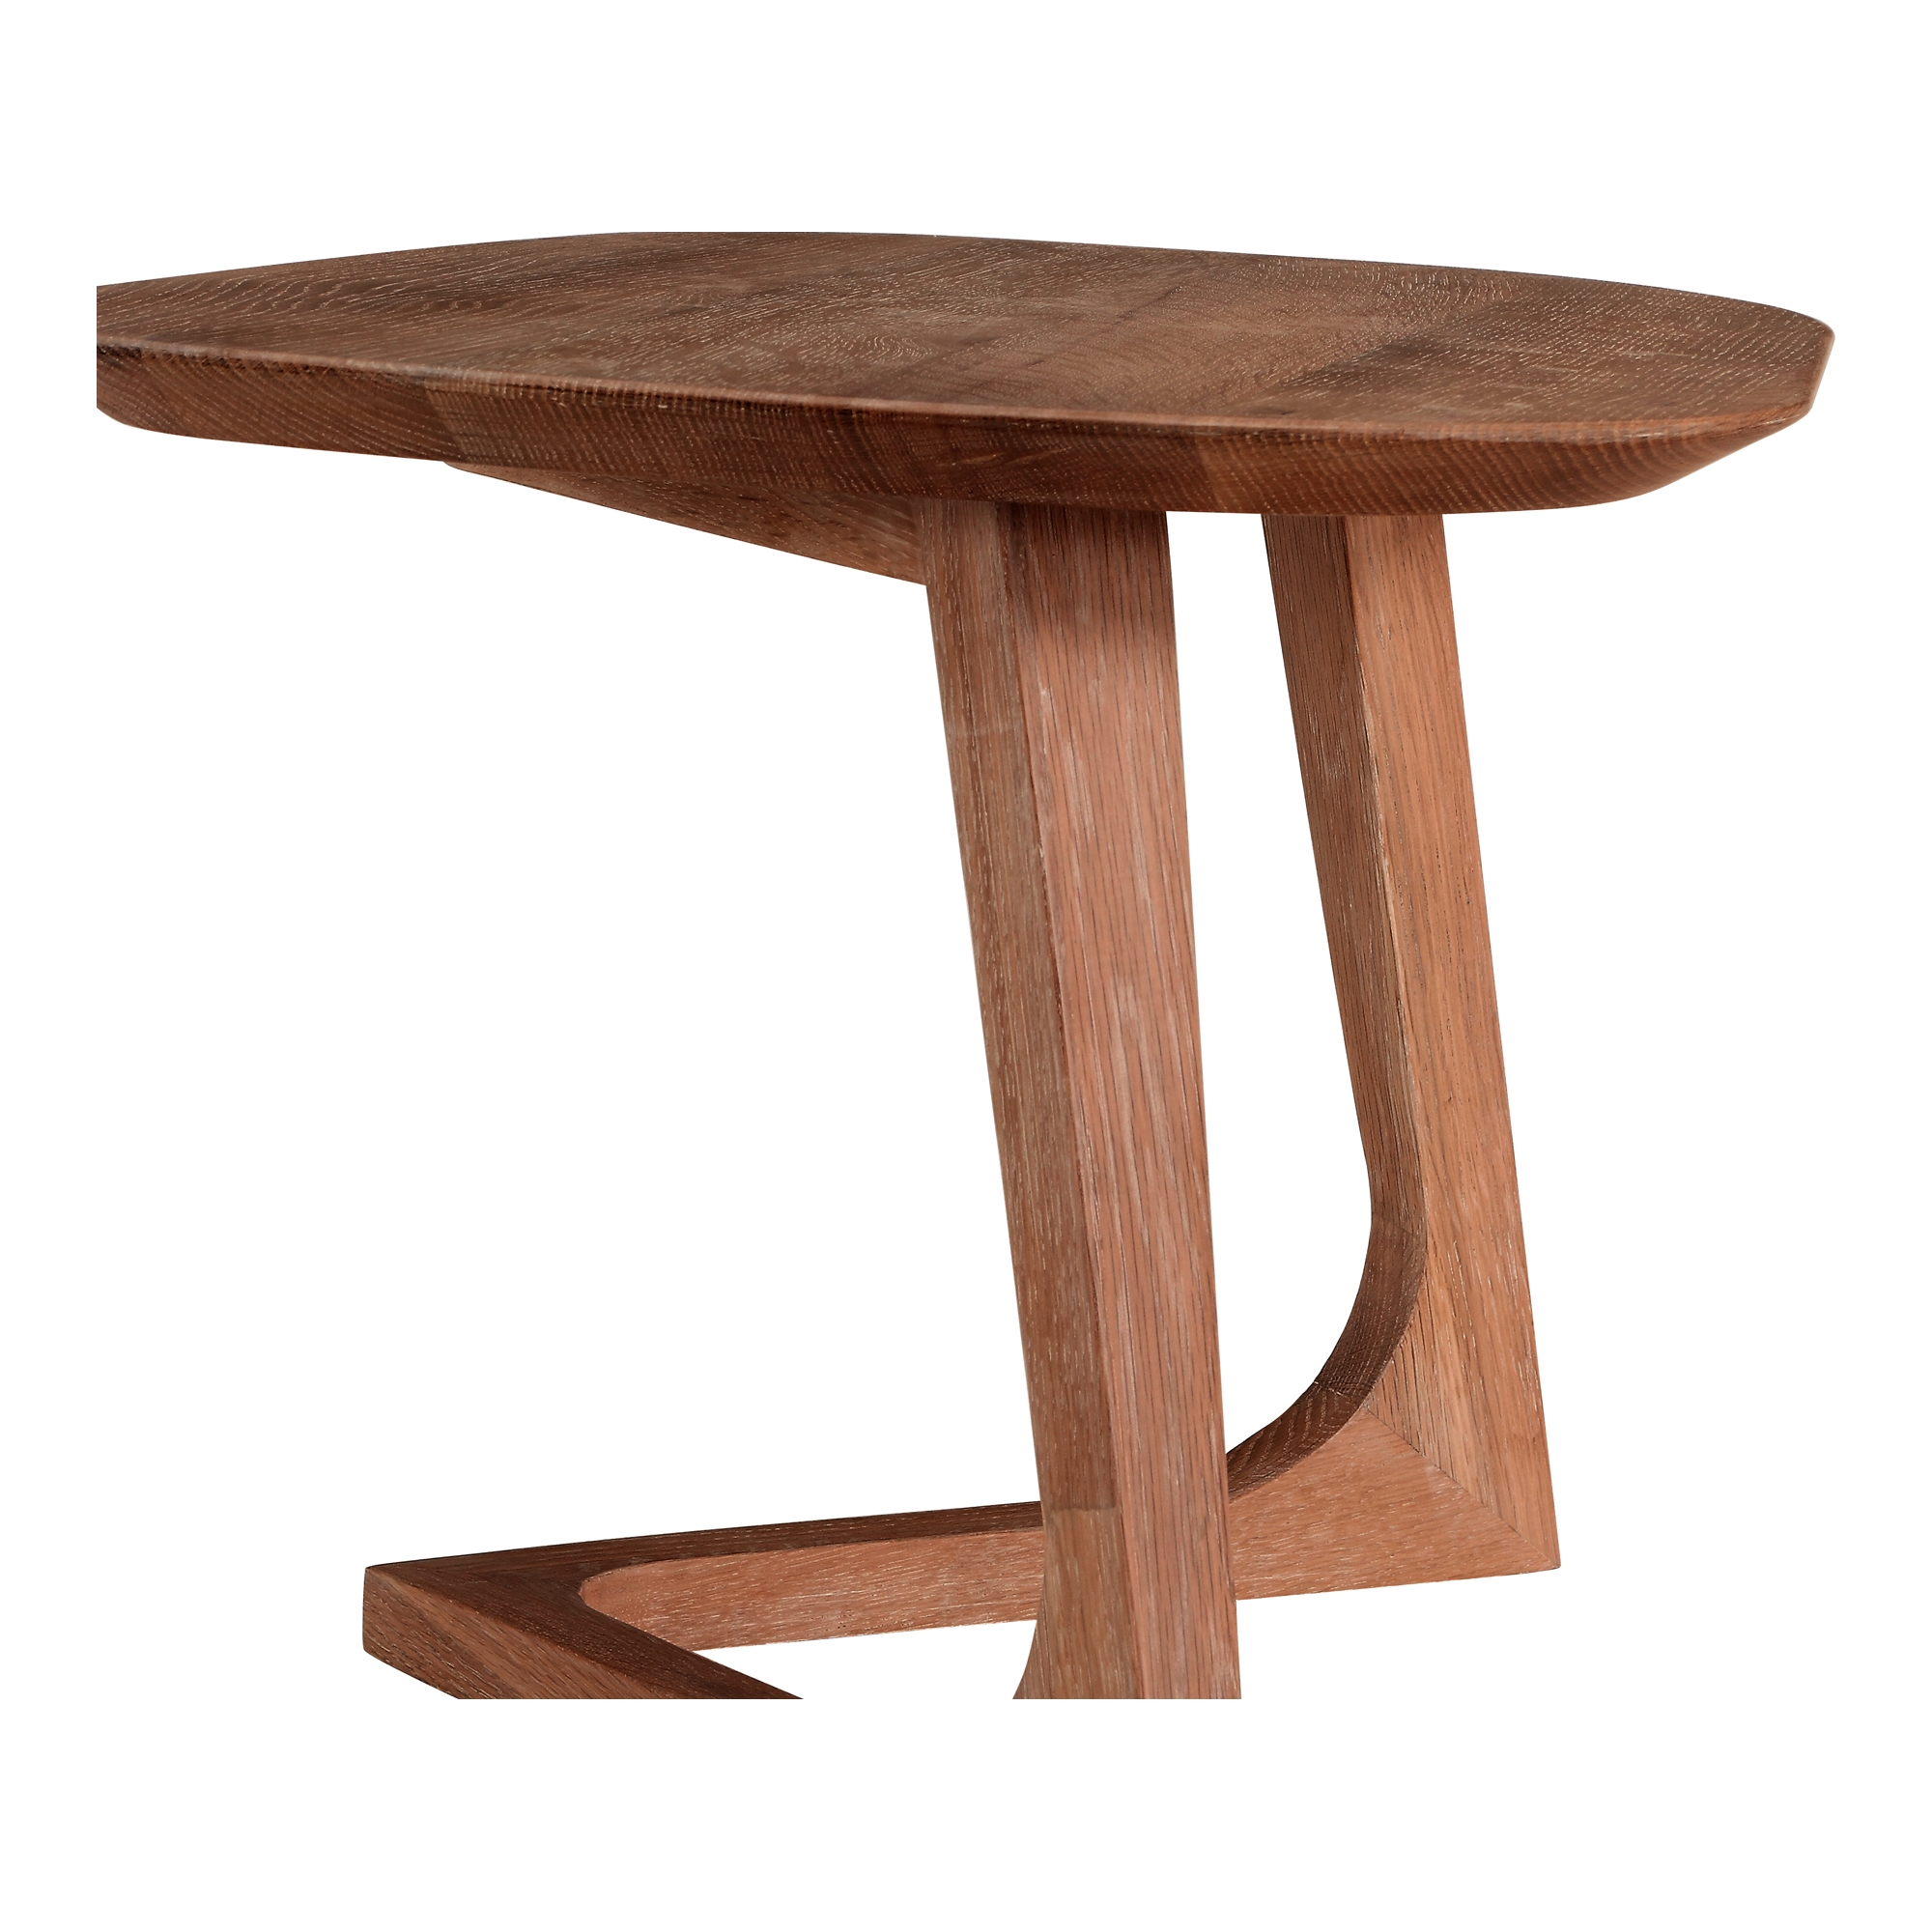 GODENZA END TABLE - Image 5